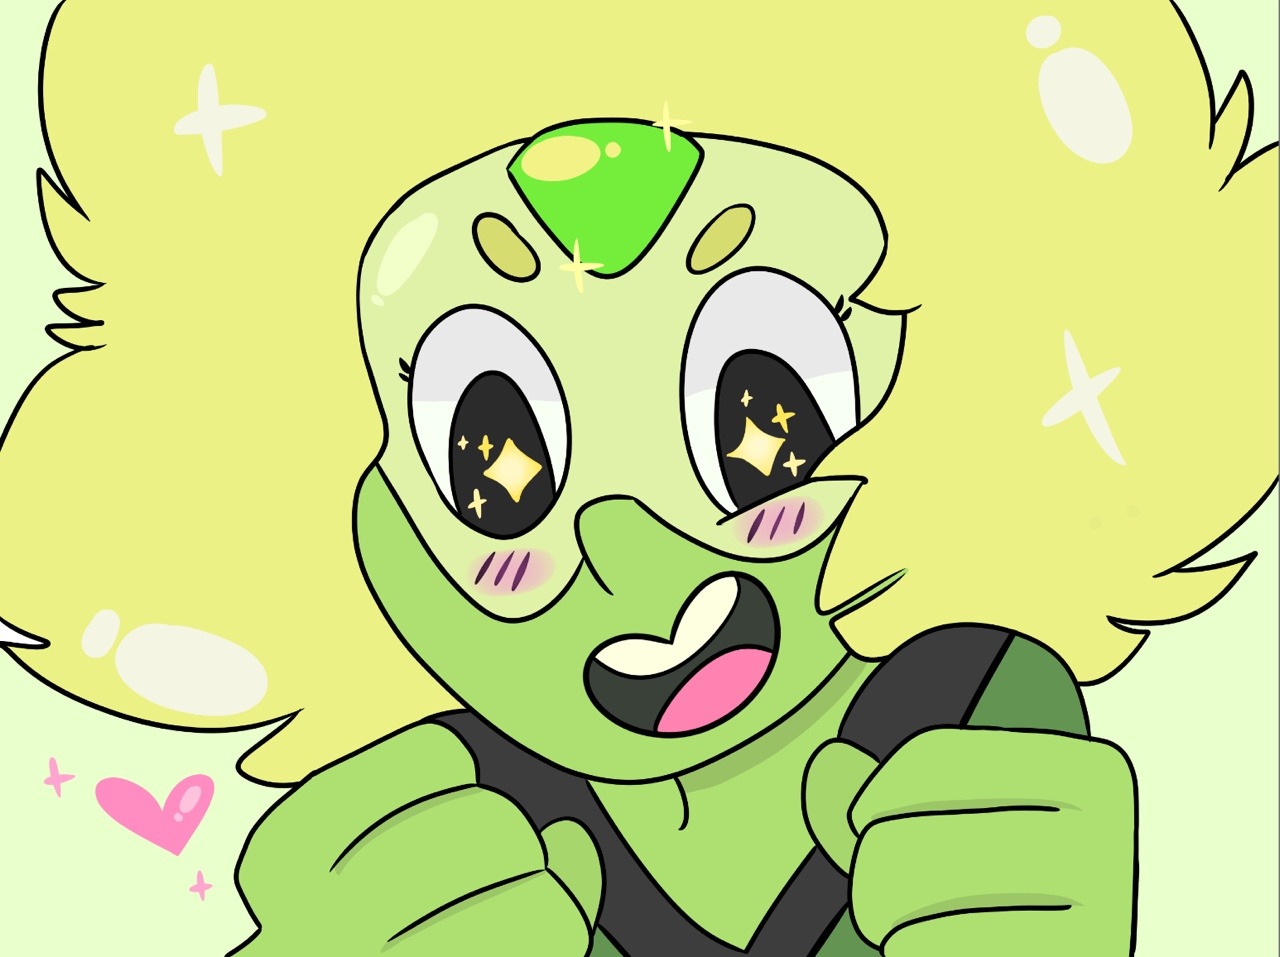 THANK YOU AWSOME CLODS FOR OVER 1.1 THOUSAND FOLLOWERS!!!!! Here’s a lil’ Peri doodle as a show of our gratitude!